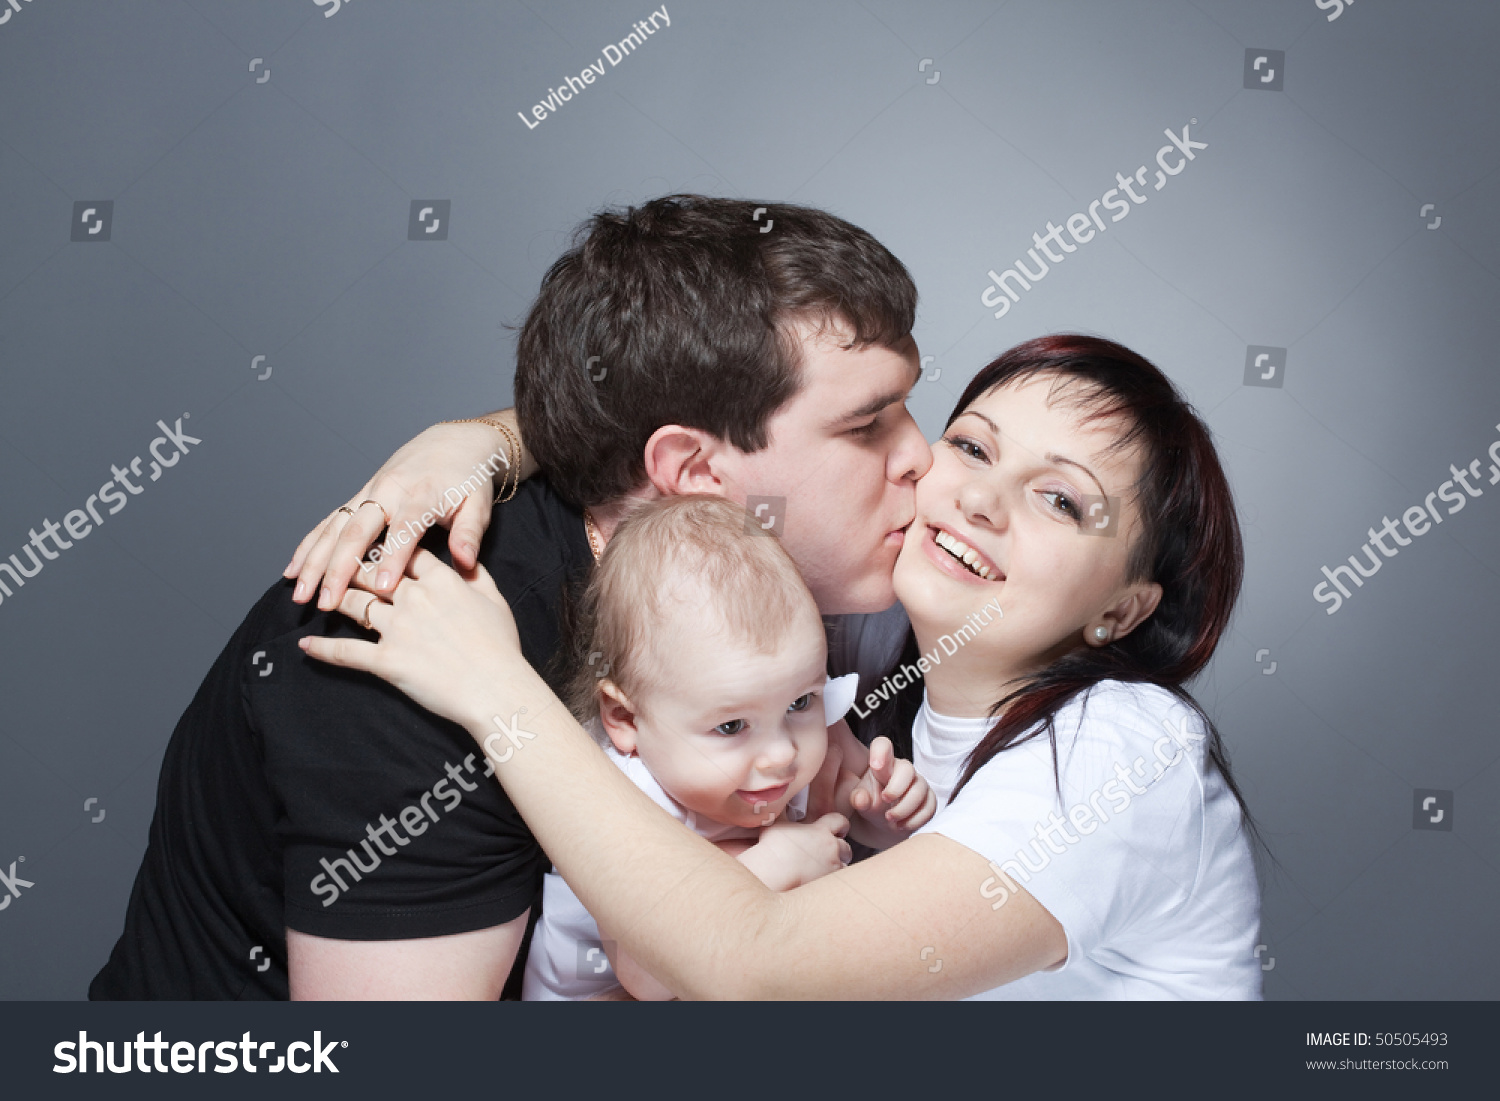 Closeup Studio Family Portrait Young Loving Stock Image Download Now